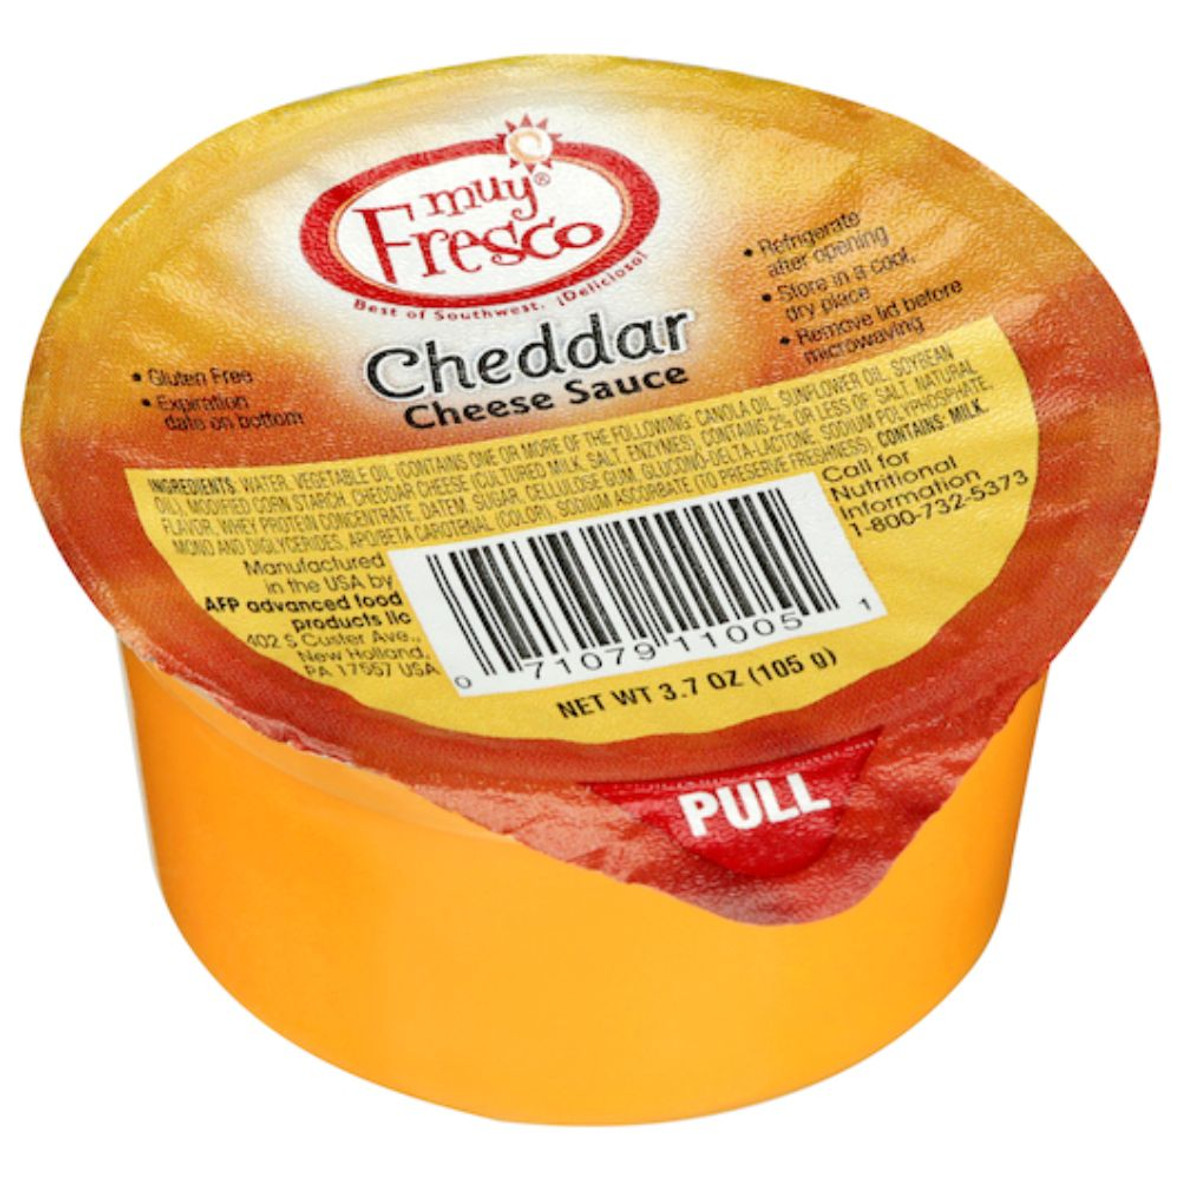 Afp Muy Fresco Cheddar Cheese Sauce Cup